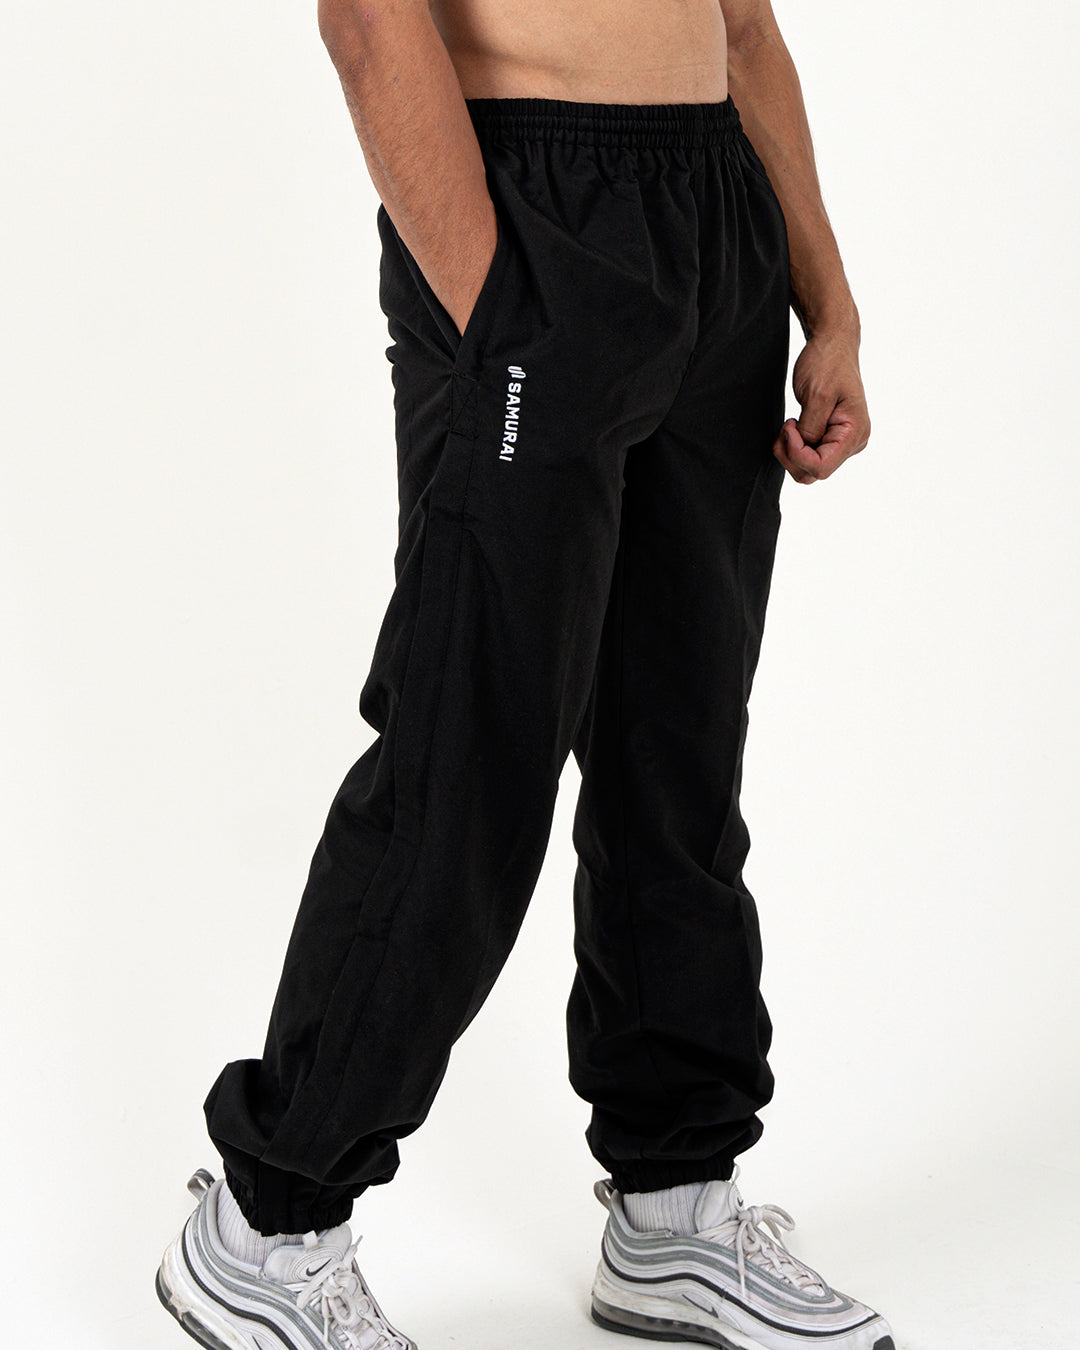 EP:0104 - Southland Track Pant 2.0 - Black